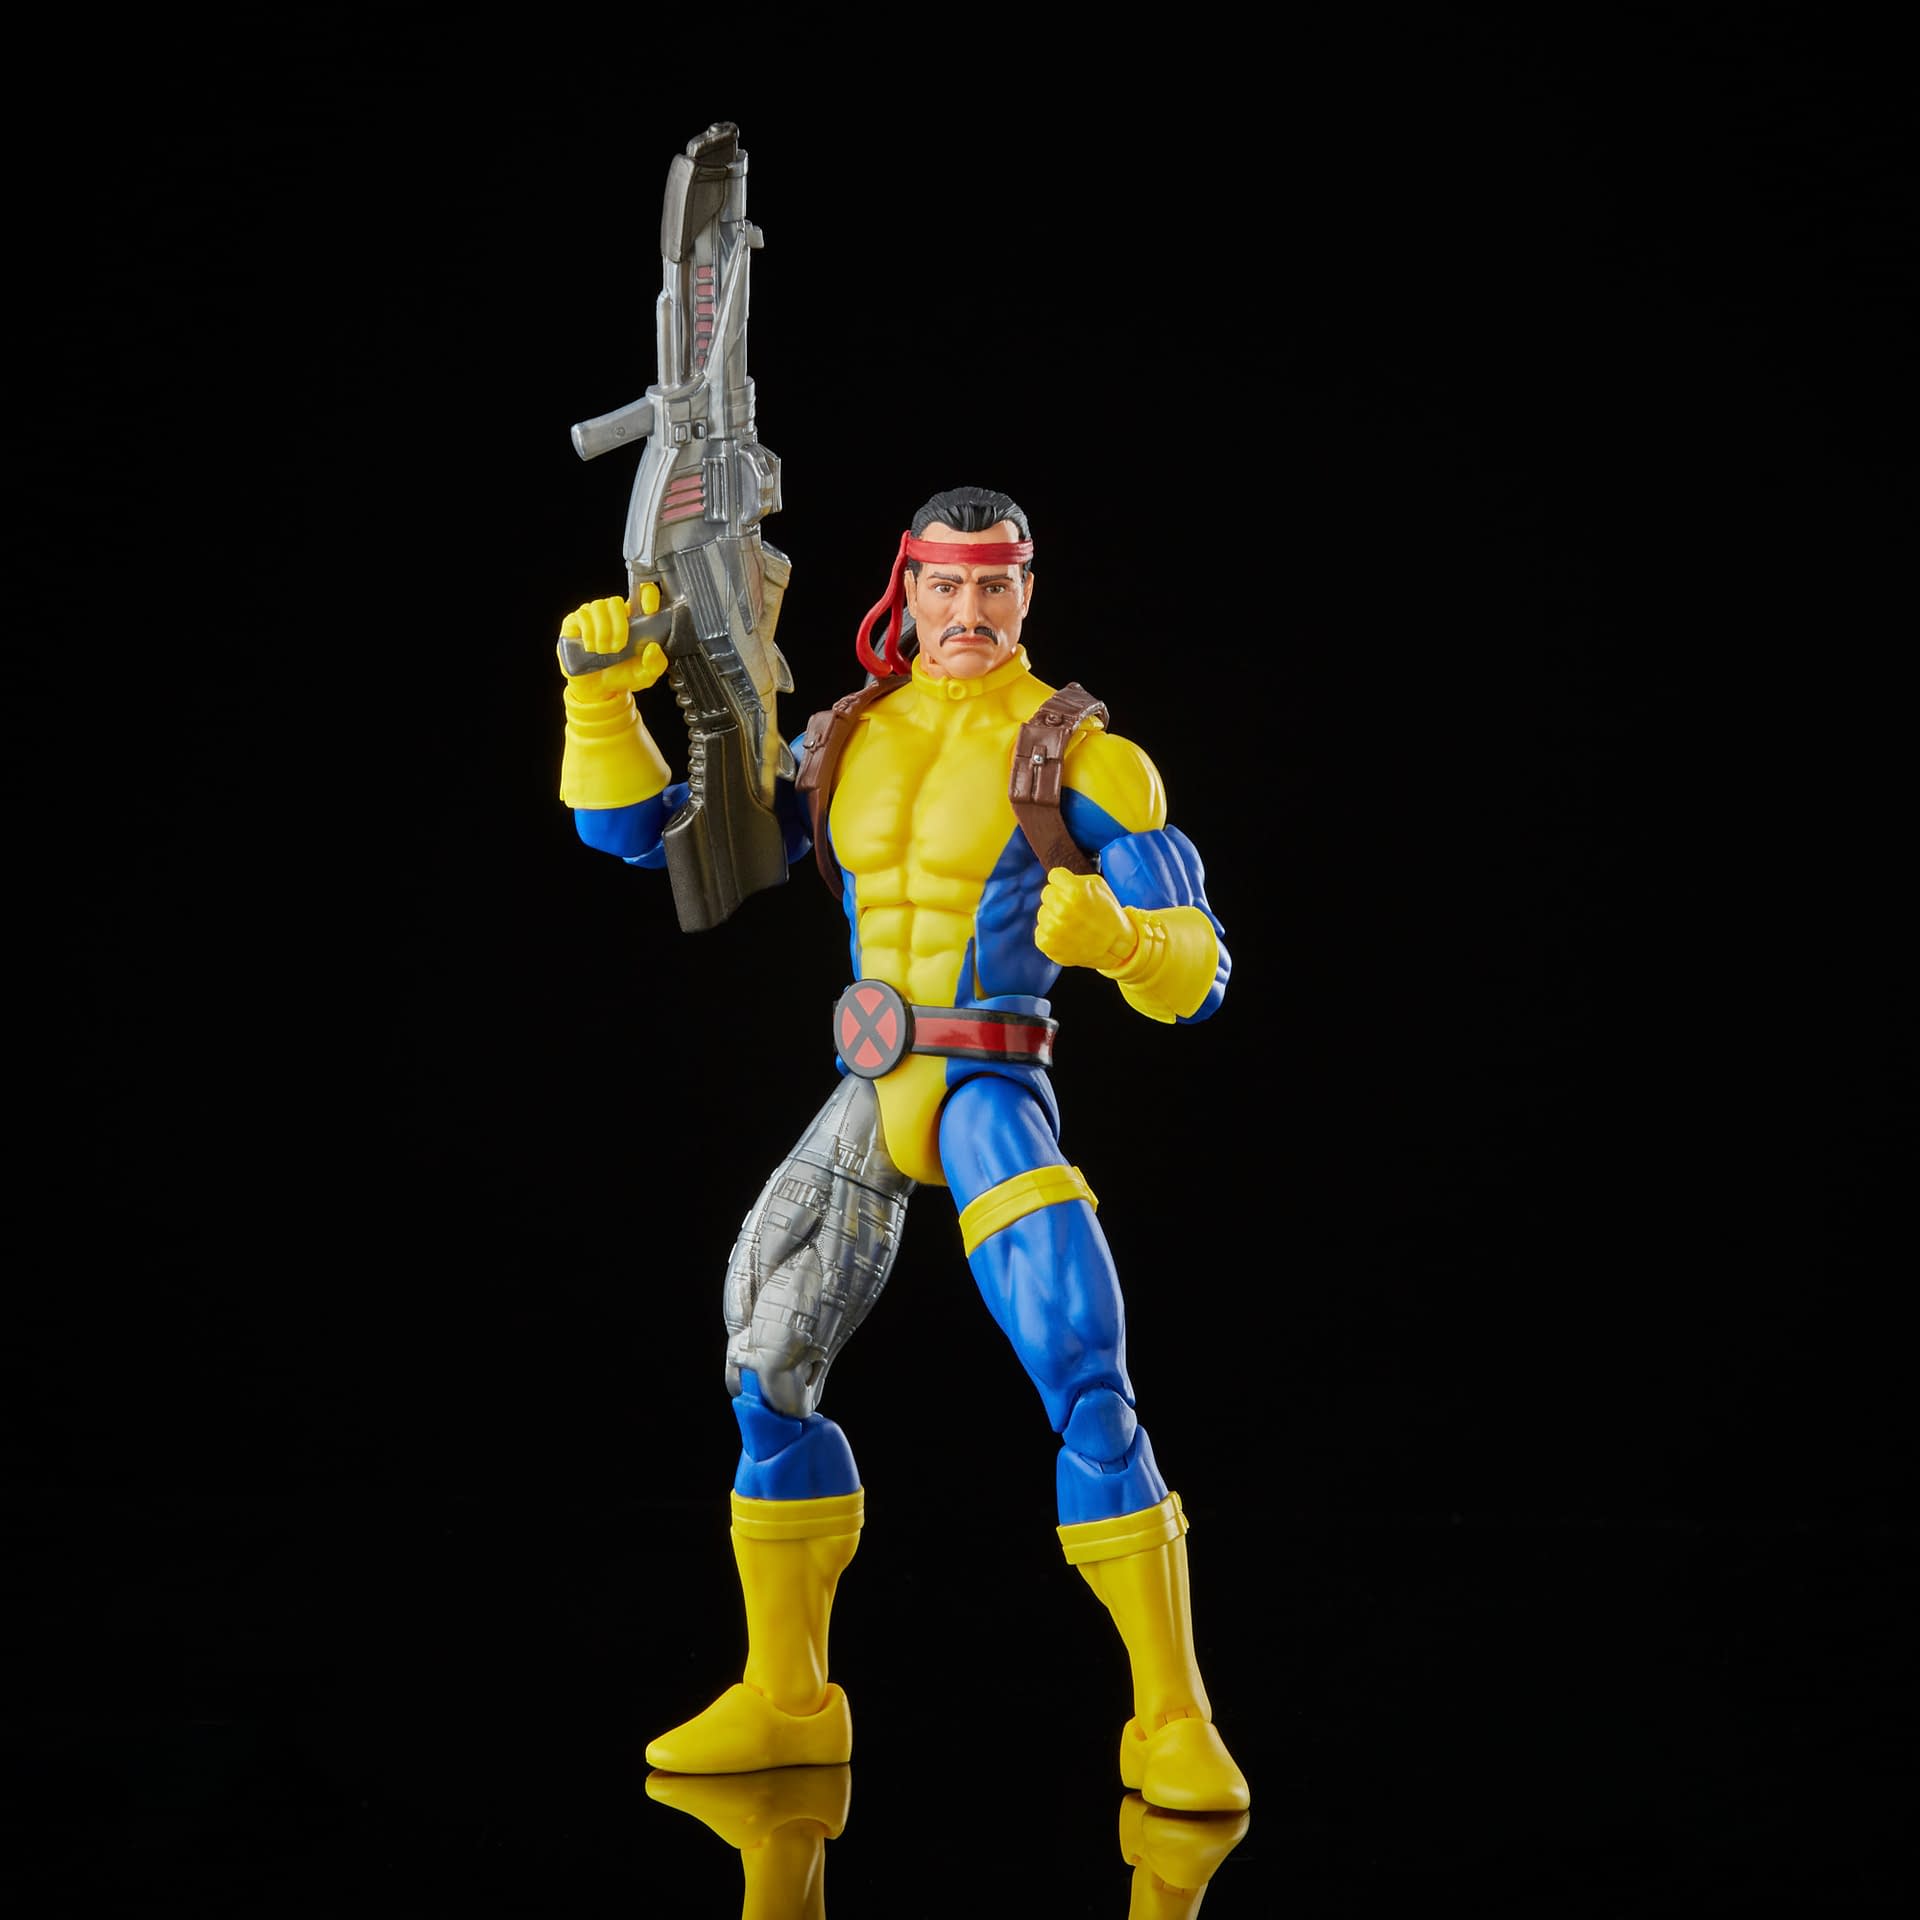 The Uncanny X-Men Are Here to Help with New Marvel Legends 3-Pack